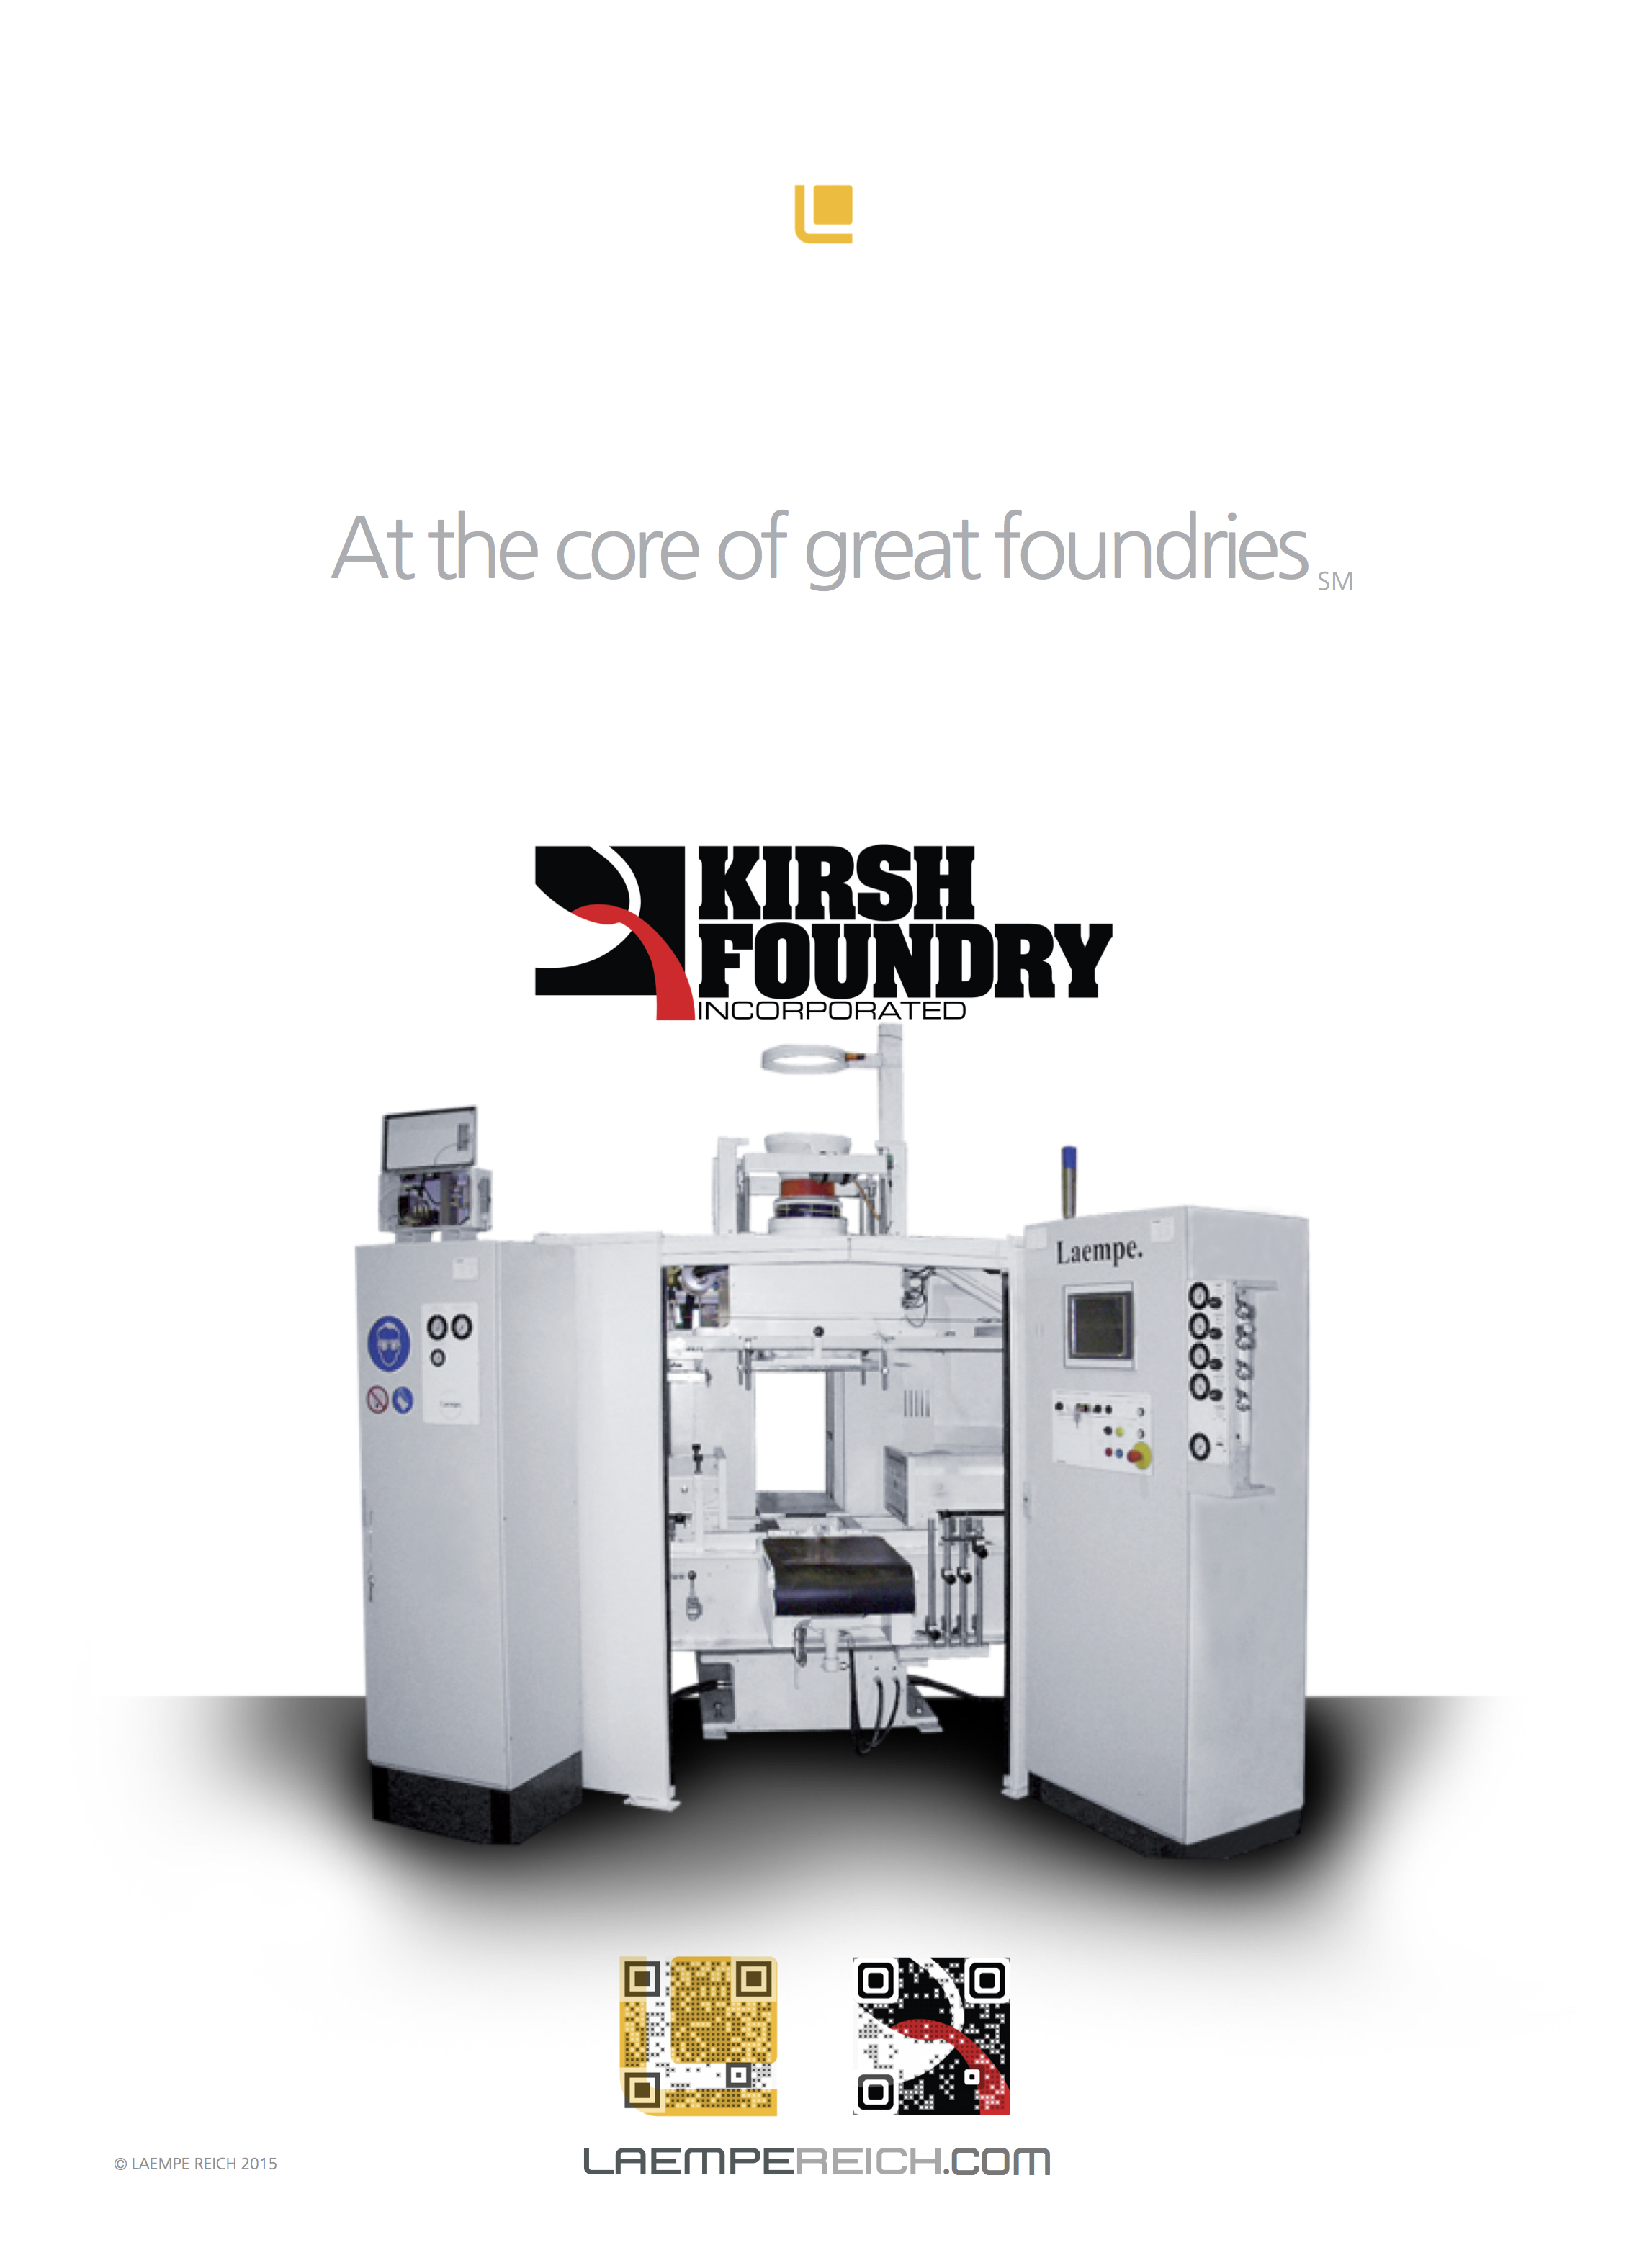 Kirsh - At the Core of Great Foundries 2015.jpg